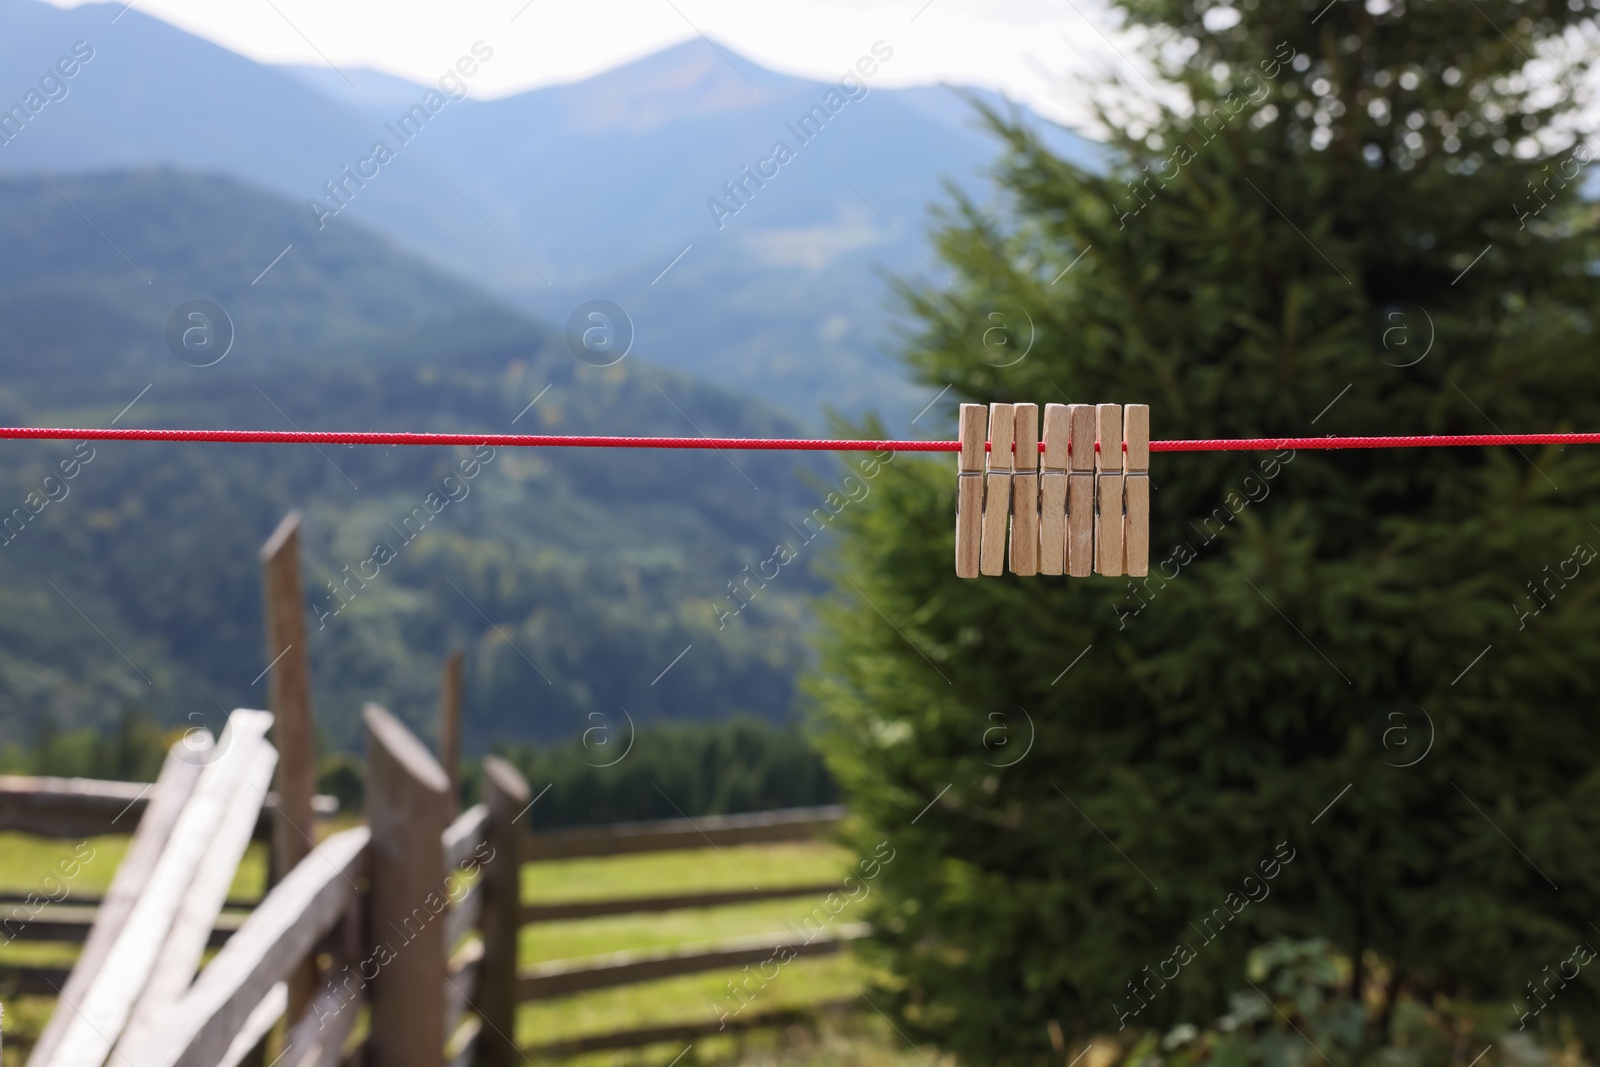 Photo of Wooden clothespins hanging on washing line in mountains